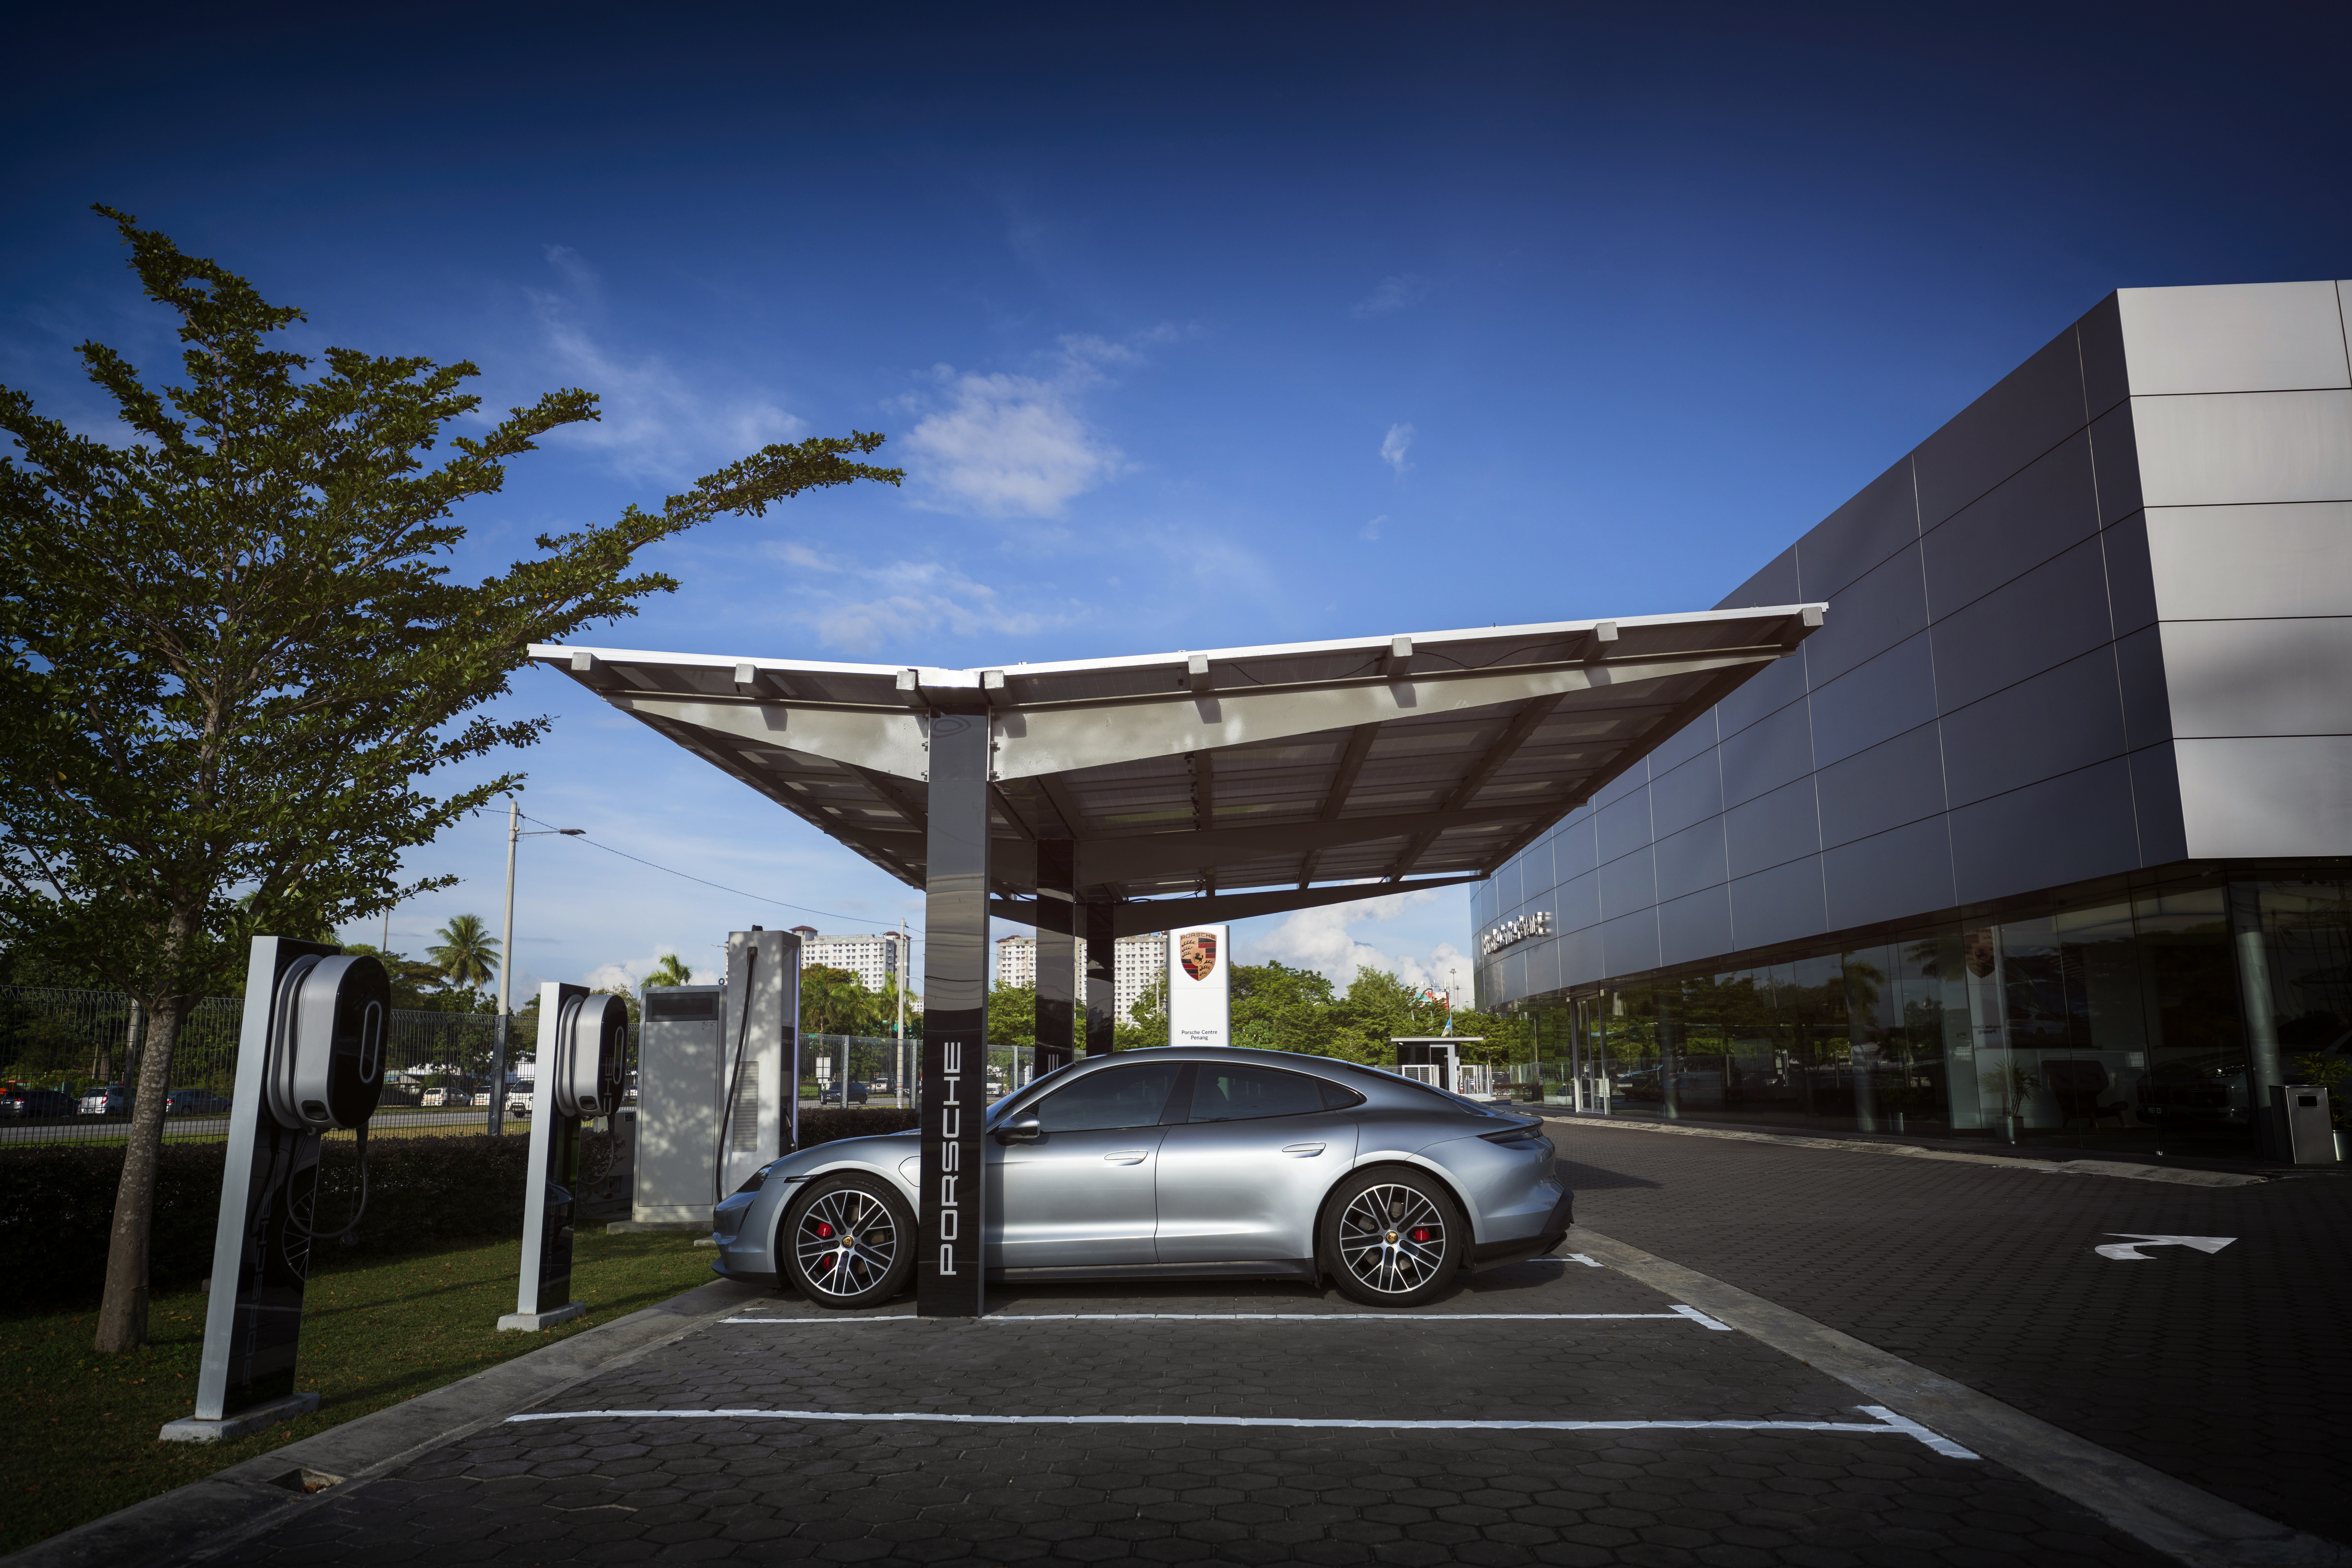 2023 Porsche Malaysia-0125 DC 350 kW charger